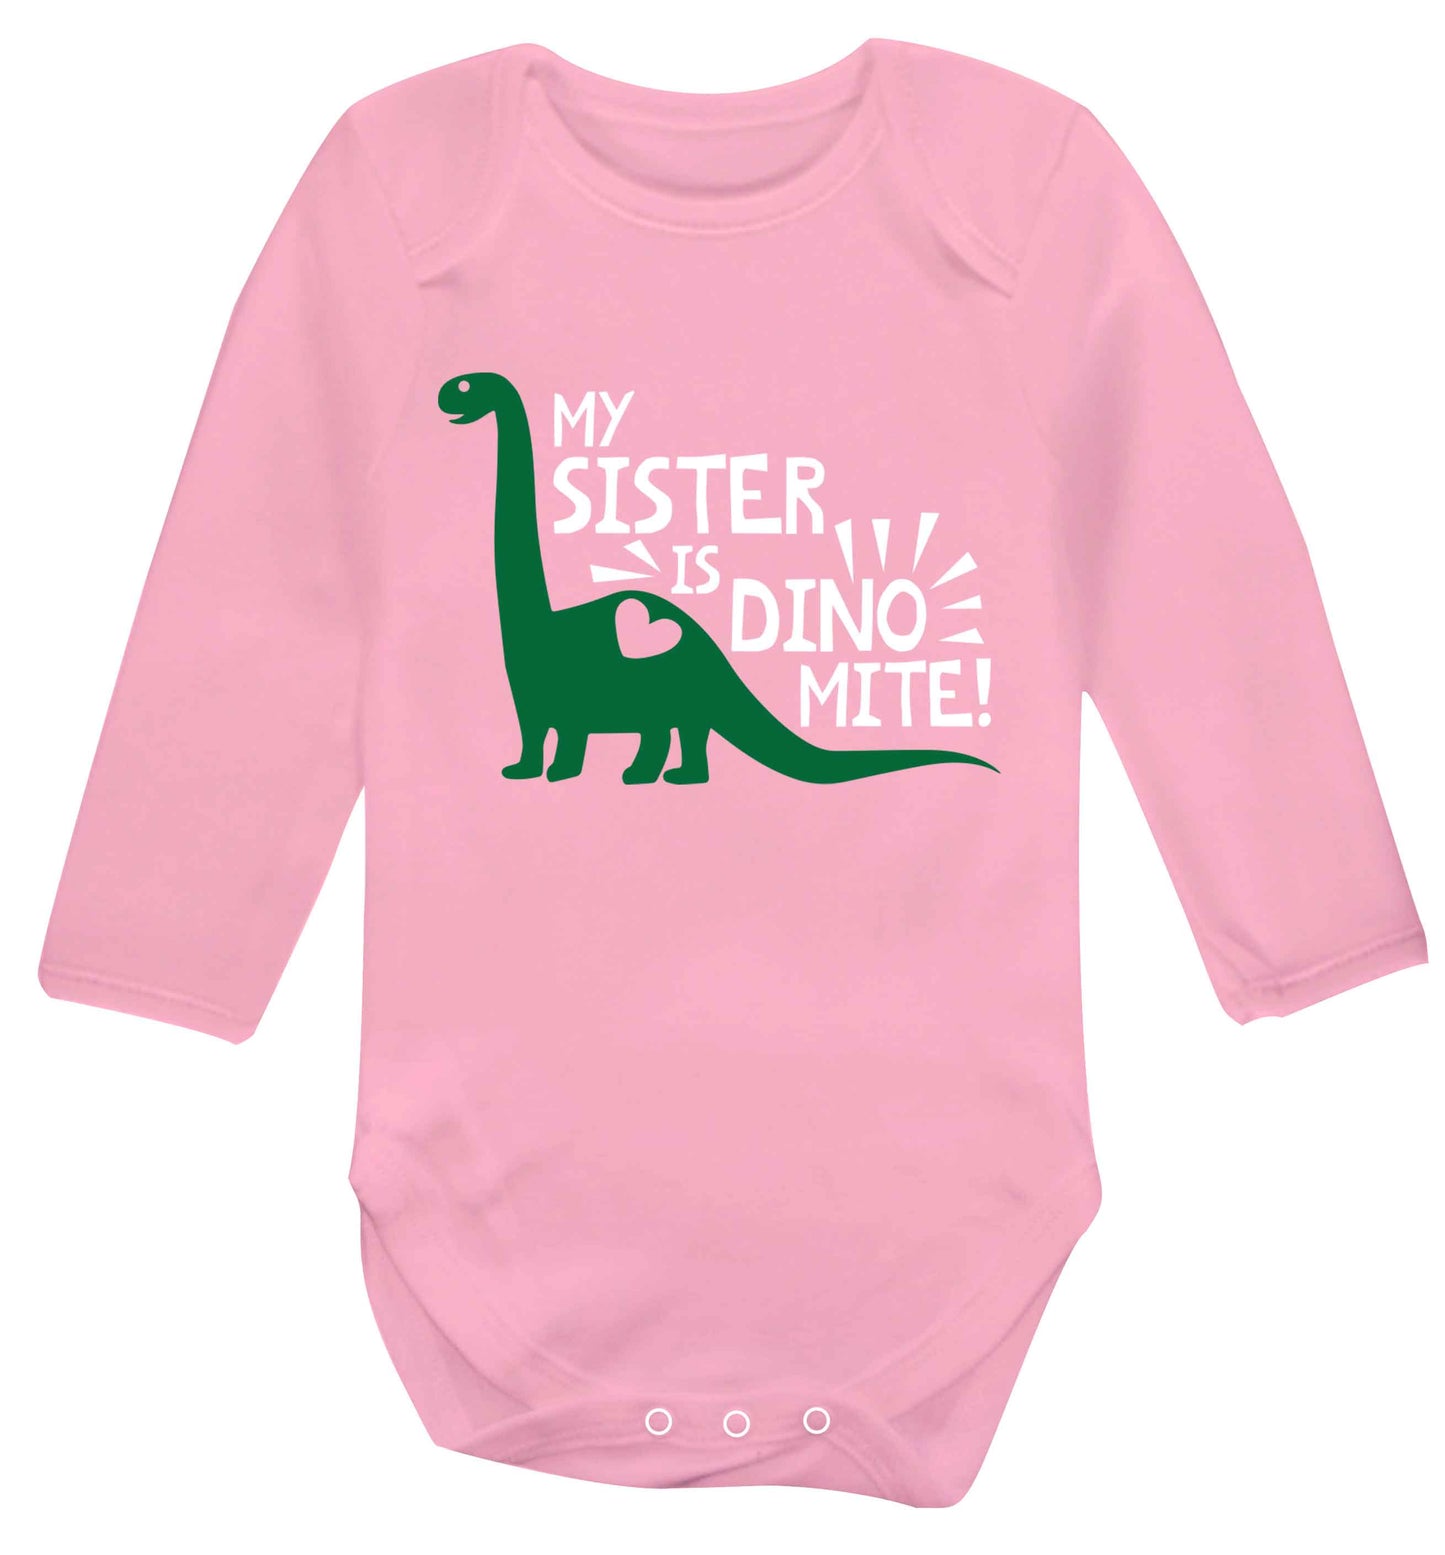 My sister is dinomite! Baby Vest long sleeved pale pink 6-12 months